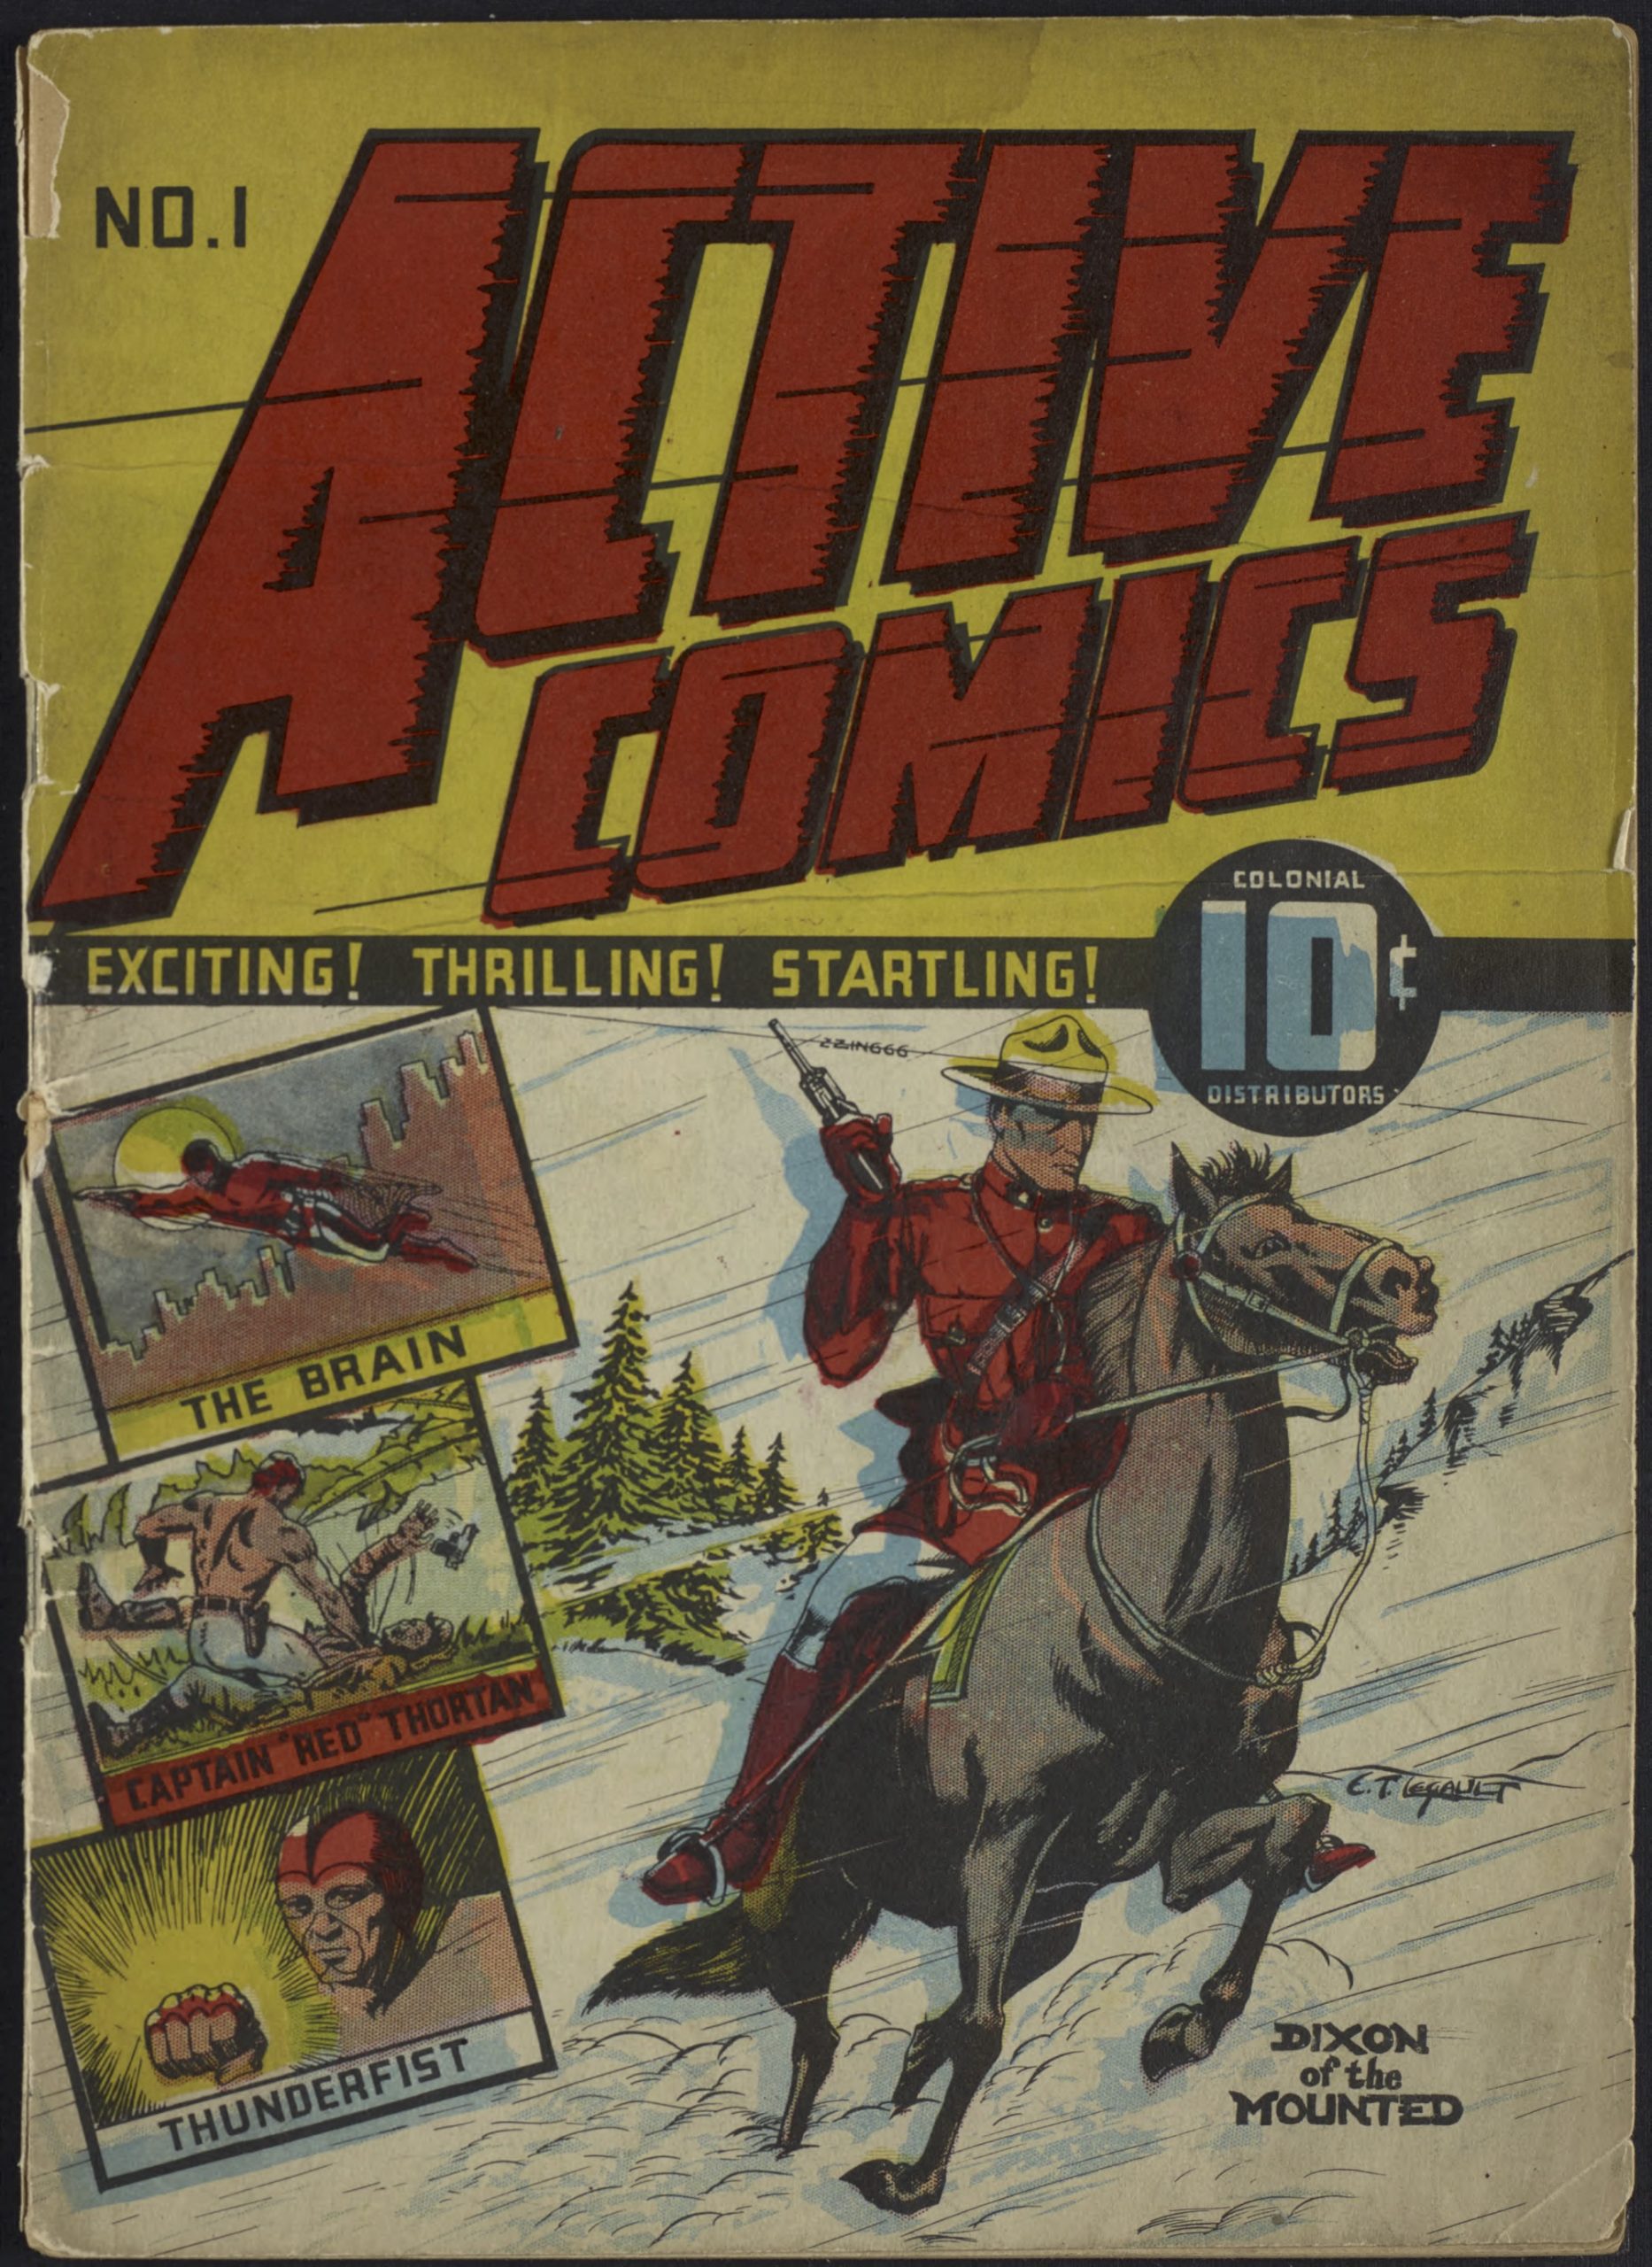 Canadian superhero Johnny Canuck is back in reprint of 1940s comic